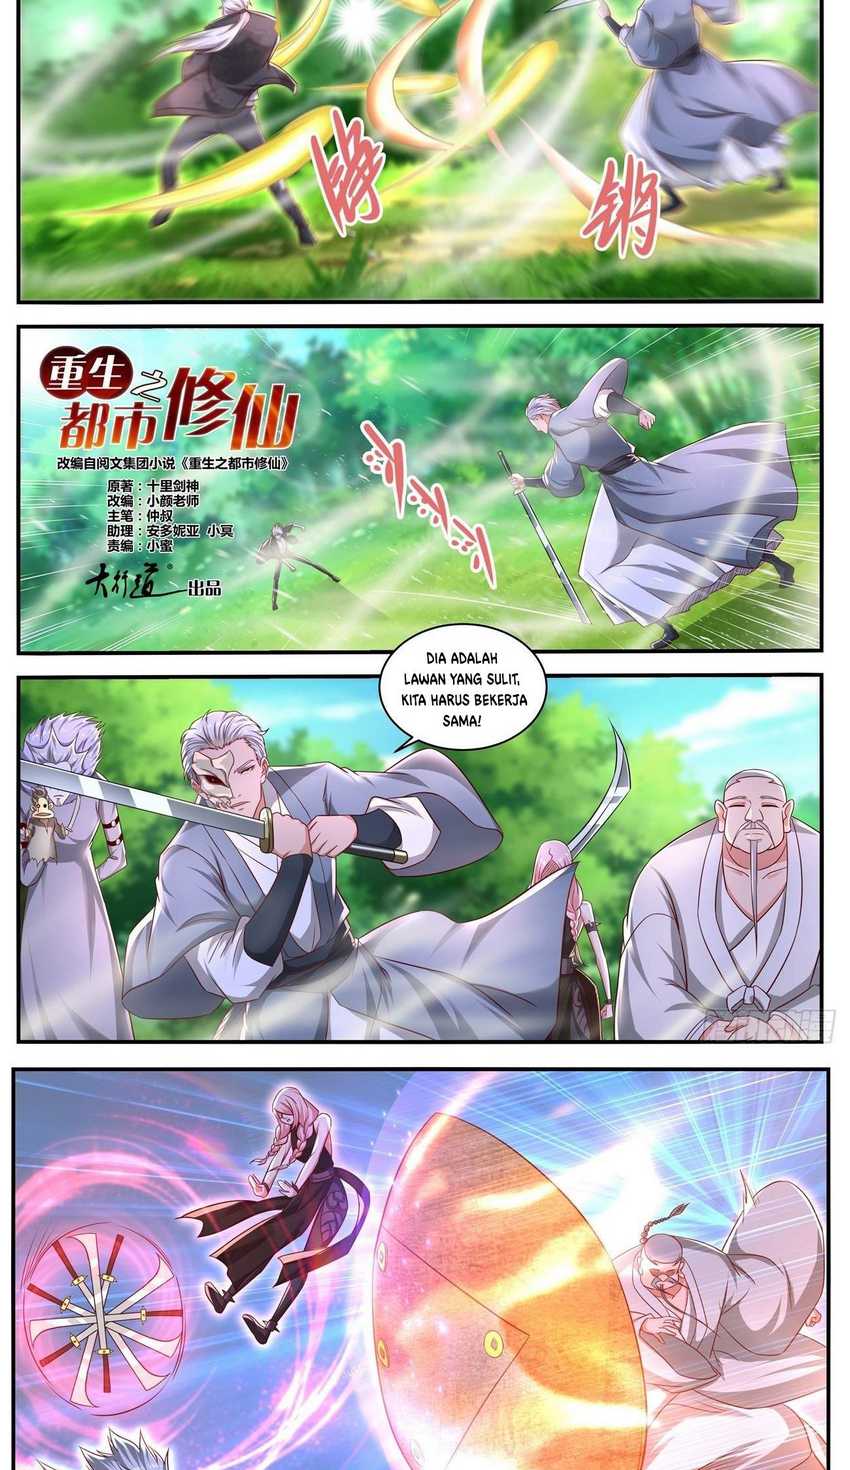 Rebirth Of The Urban Immortal Cultivator Chapter 645 bahasa indonesia